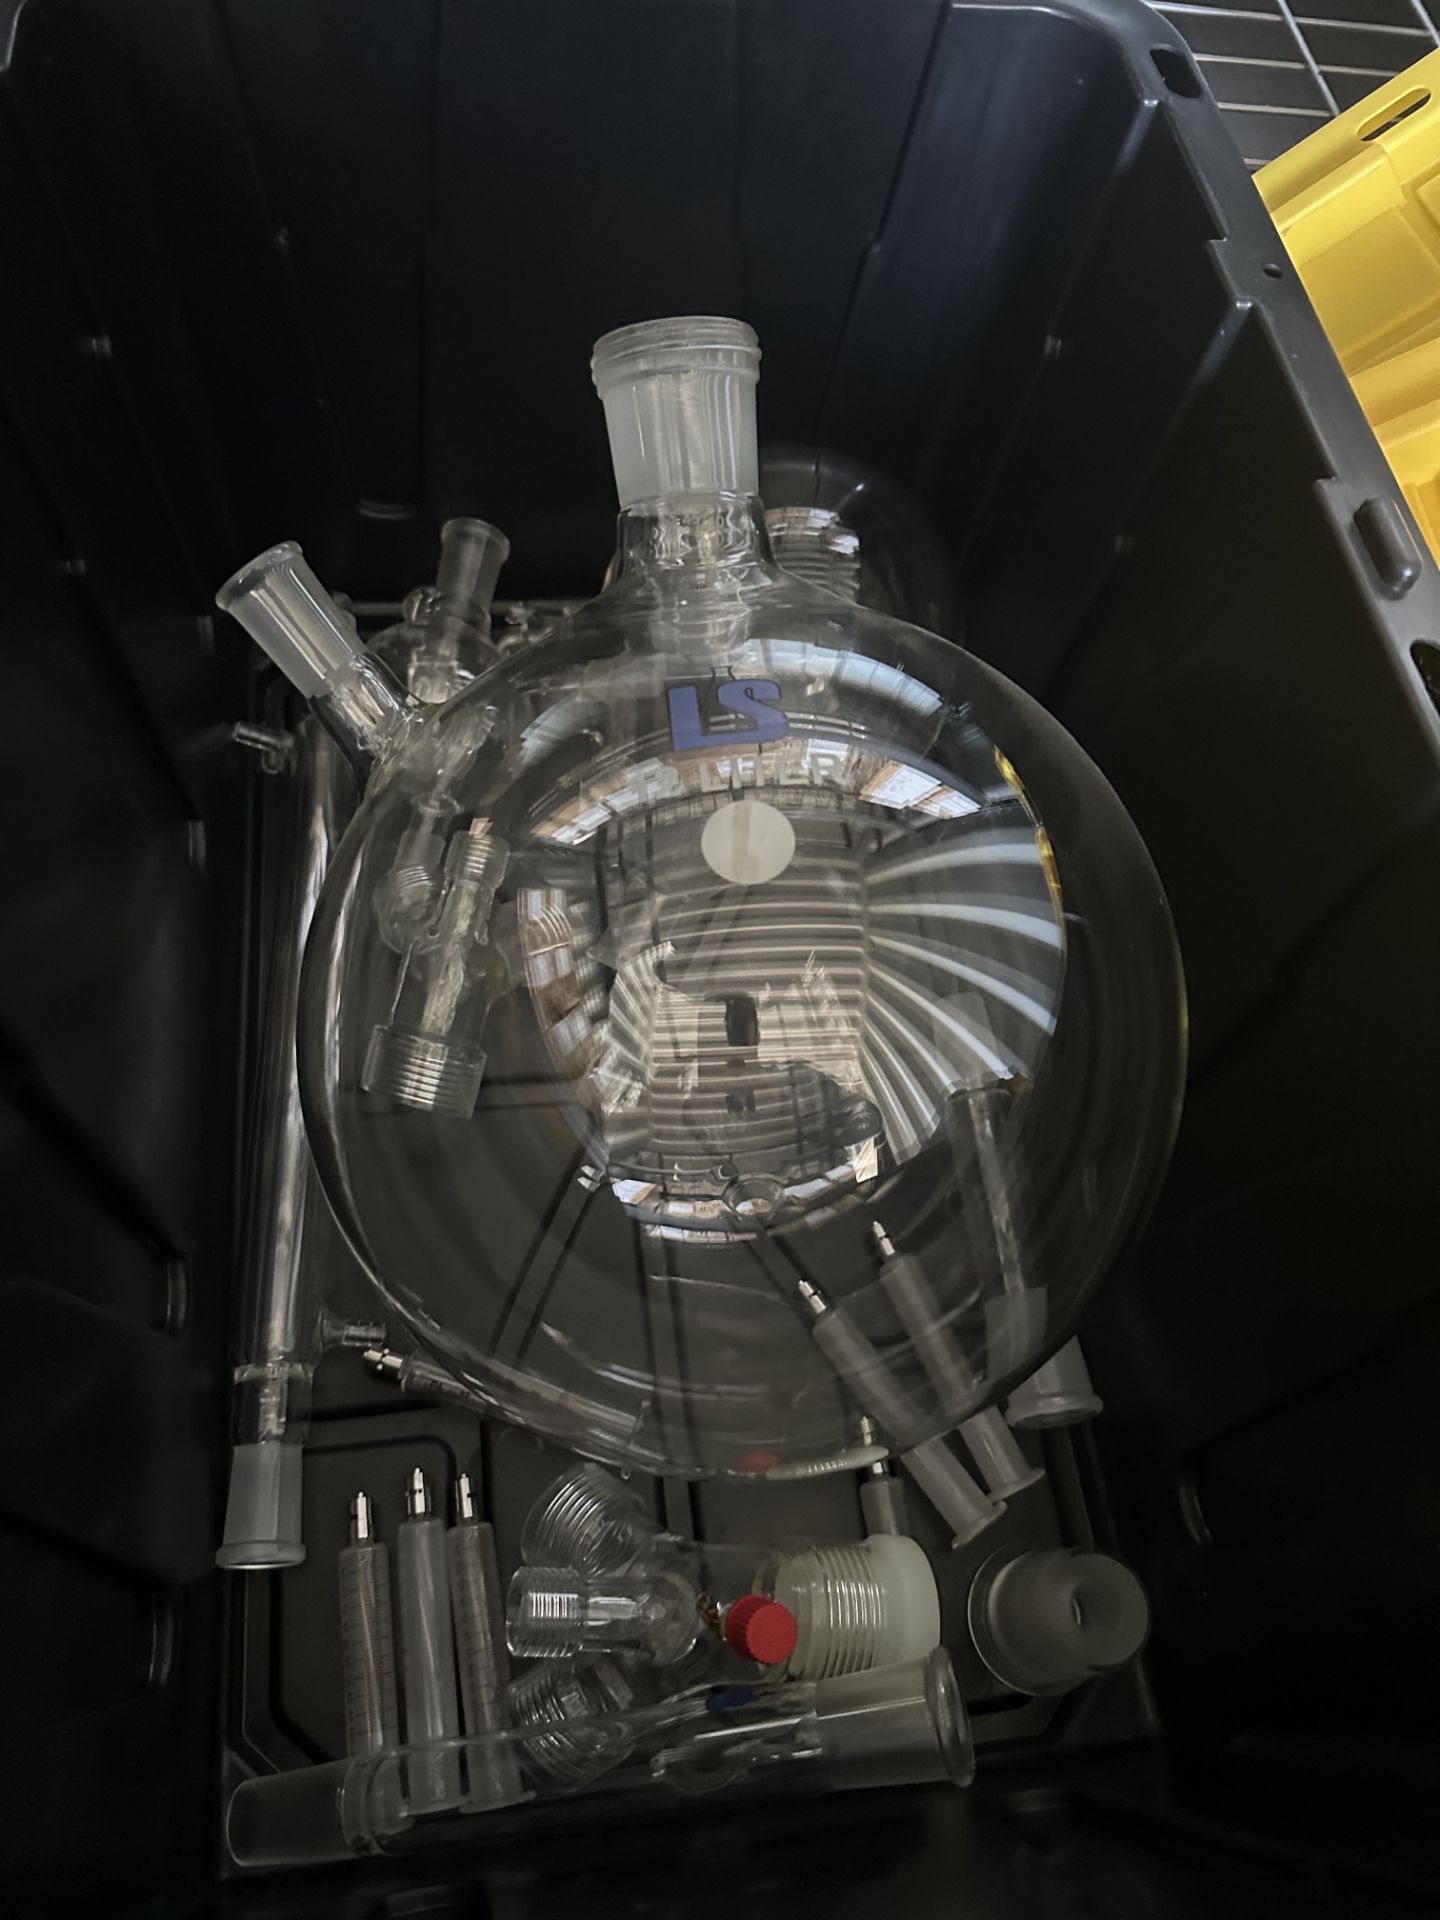 Lot of Lab Society 12 L Short Path Distillation Equipment. As is where is. - Image 35 of 40